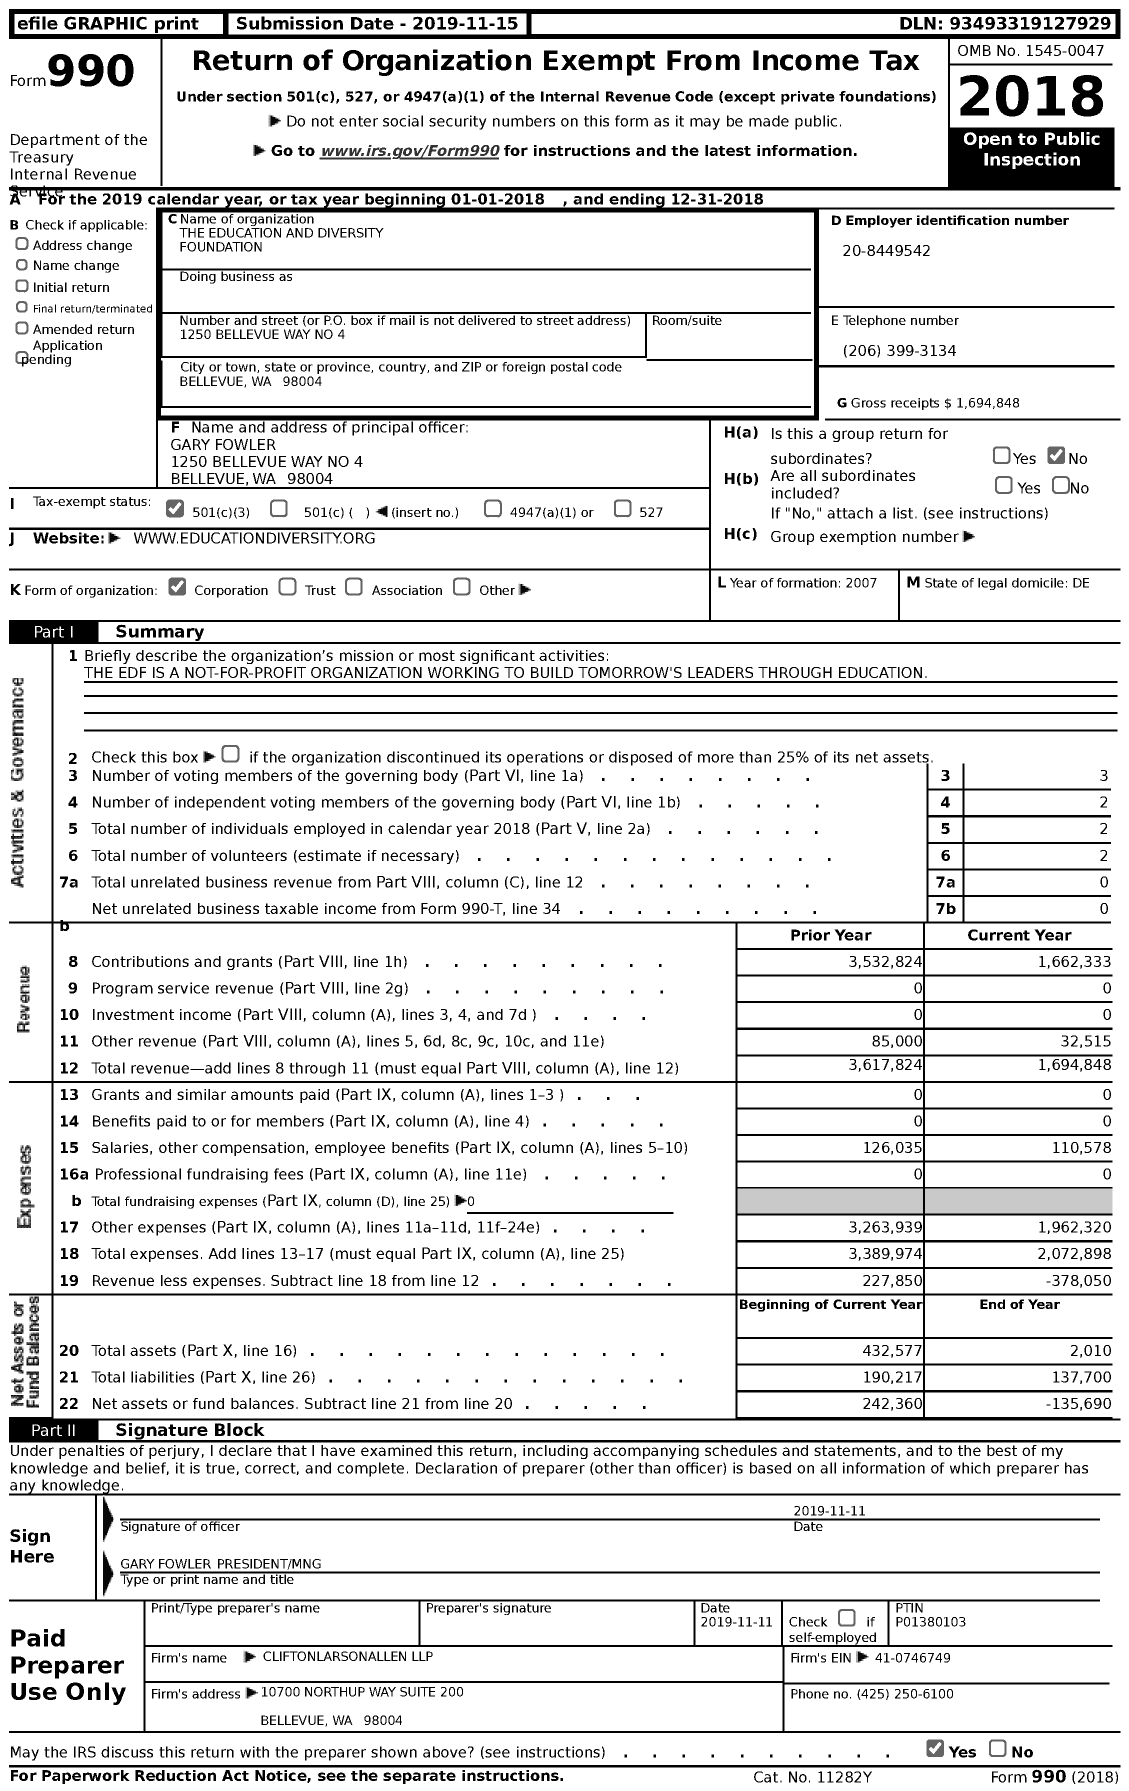 Image of first page of 2018 Form 990 for Education and Diversity Foundation (EDF)